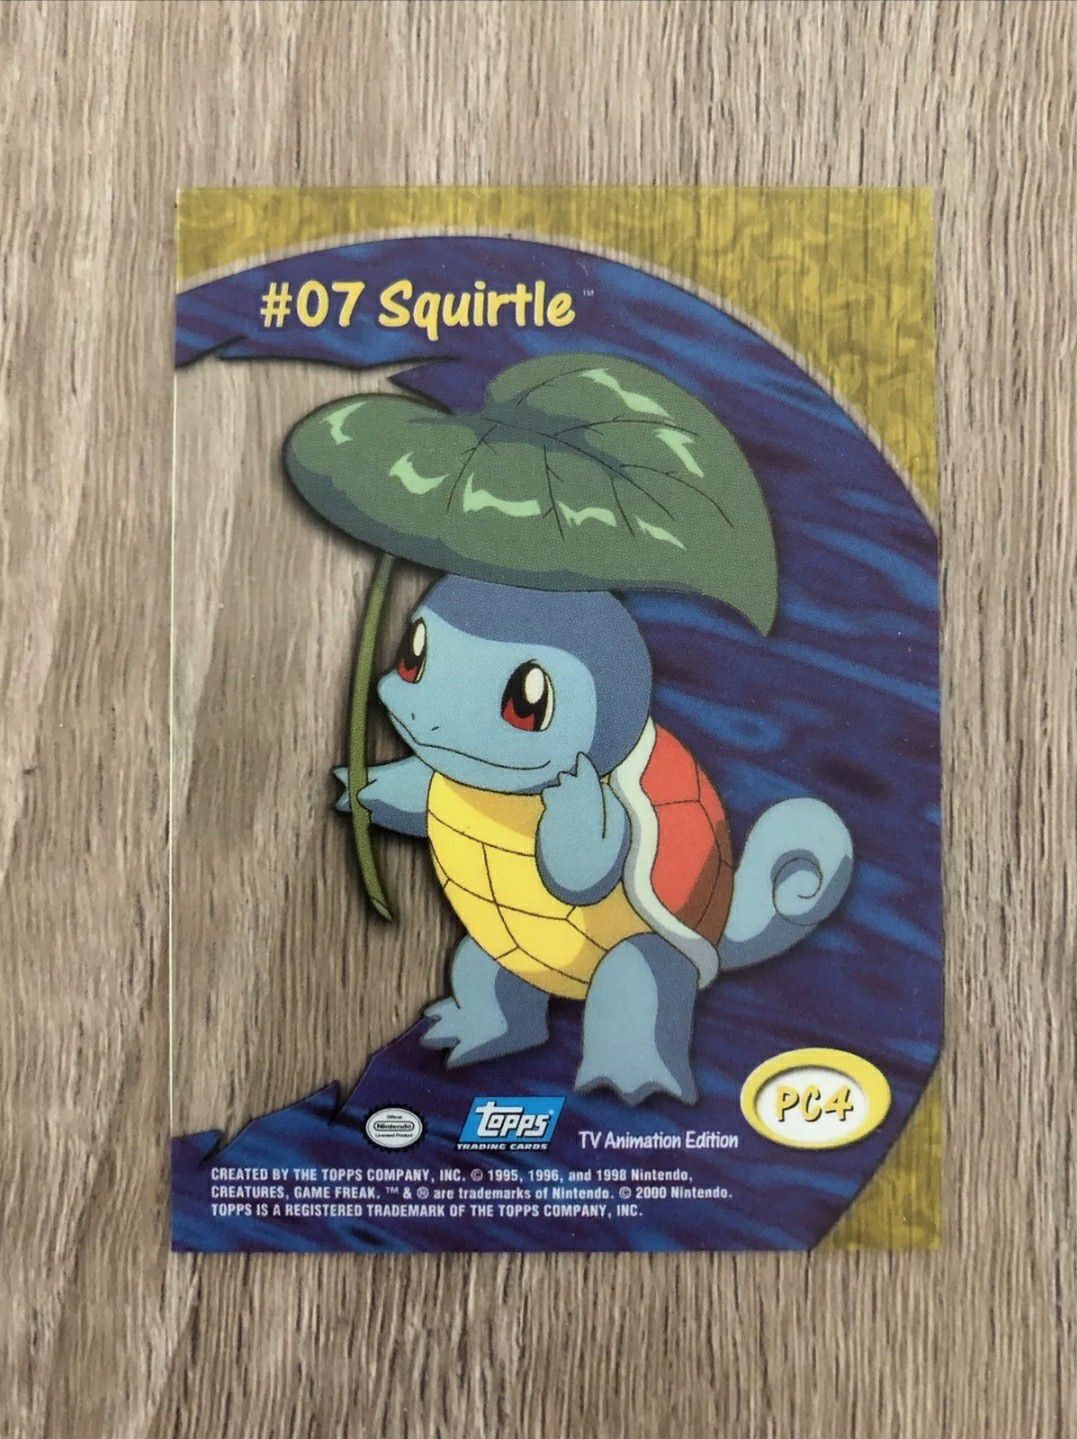 Rare Pokemon Topps Trading Card Clear Plastic PC4 Squirtle #07 Acetate